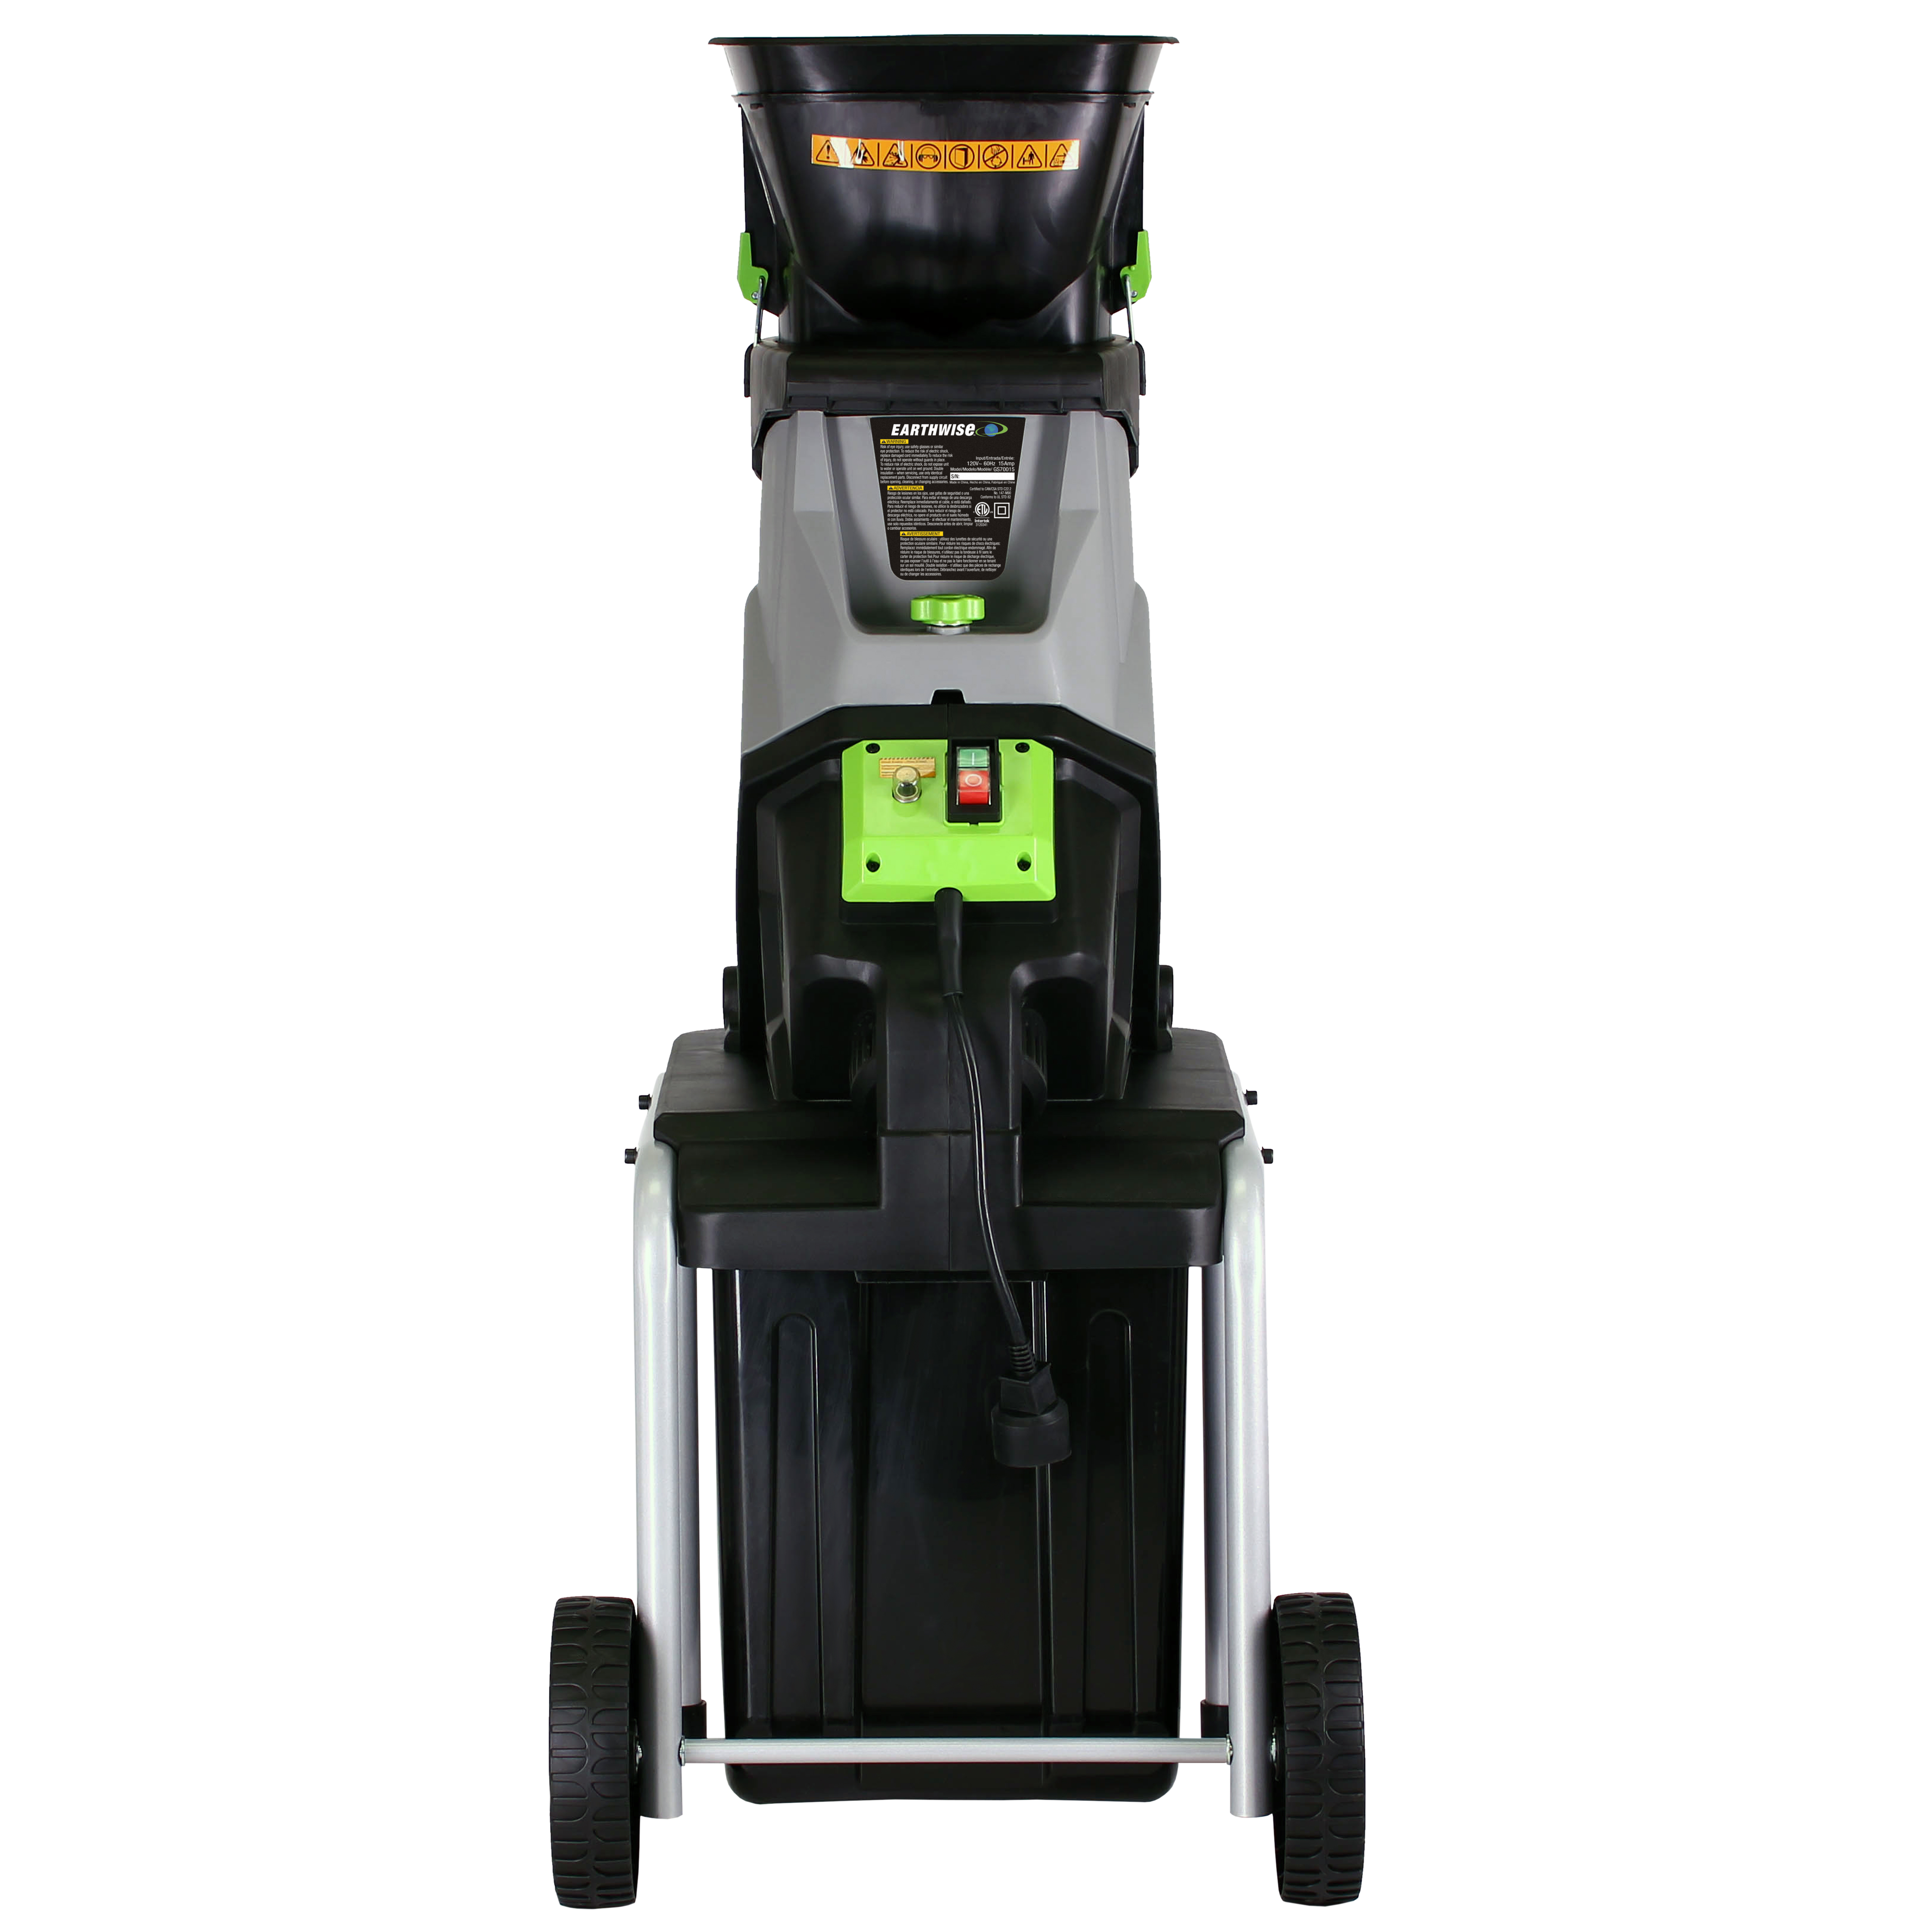 Earthwise GS70015 15-Amp Corded Electric Garden Chipper/Shredder with Collection Bin - image 4 of 7